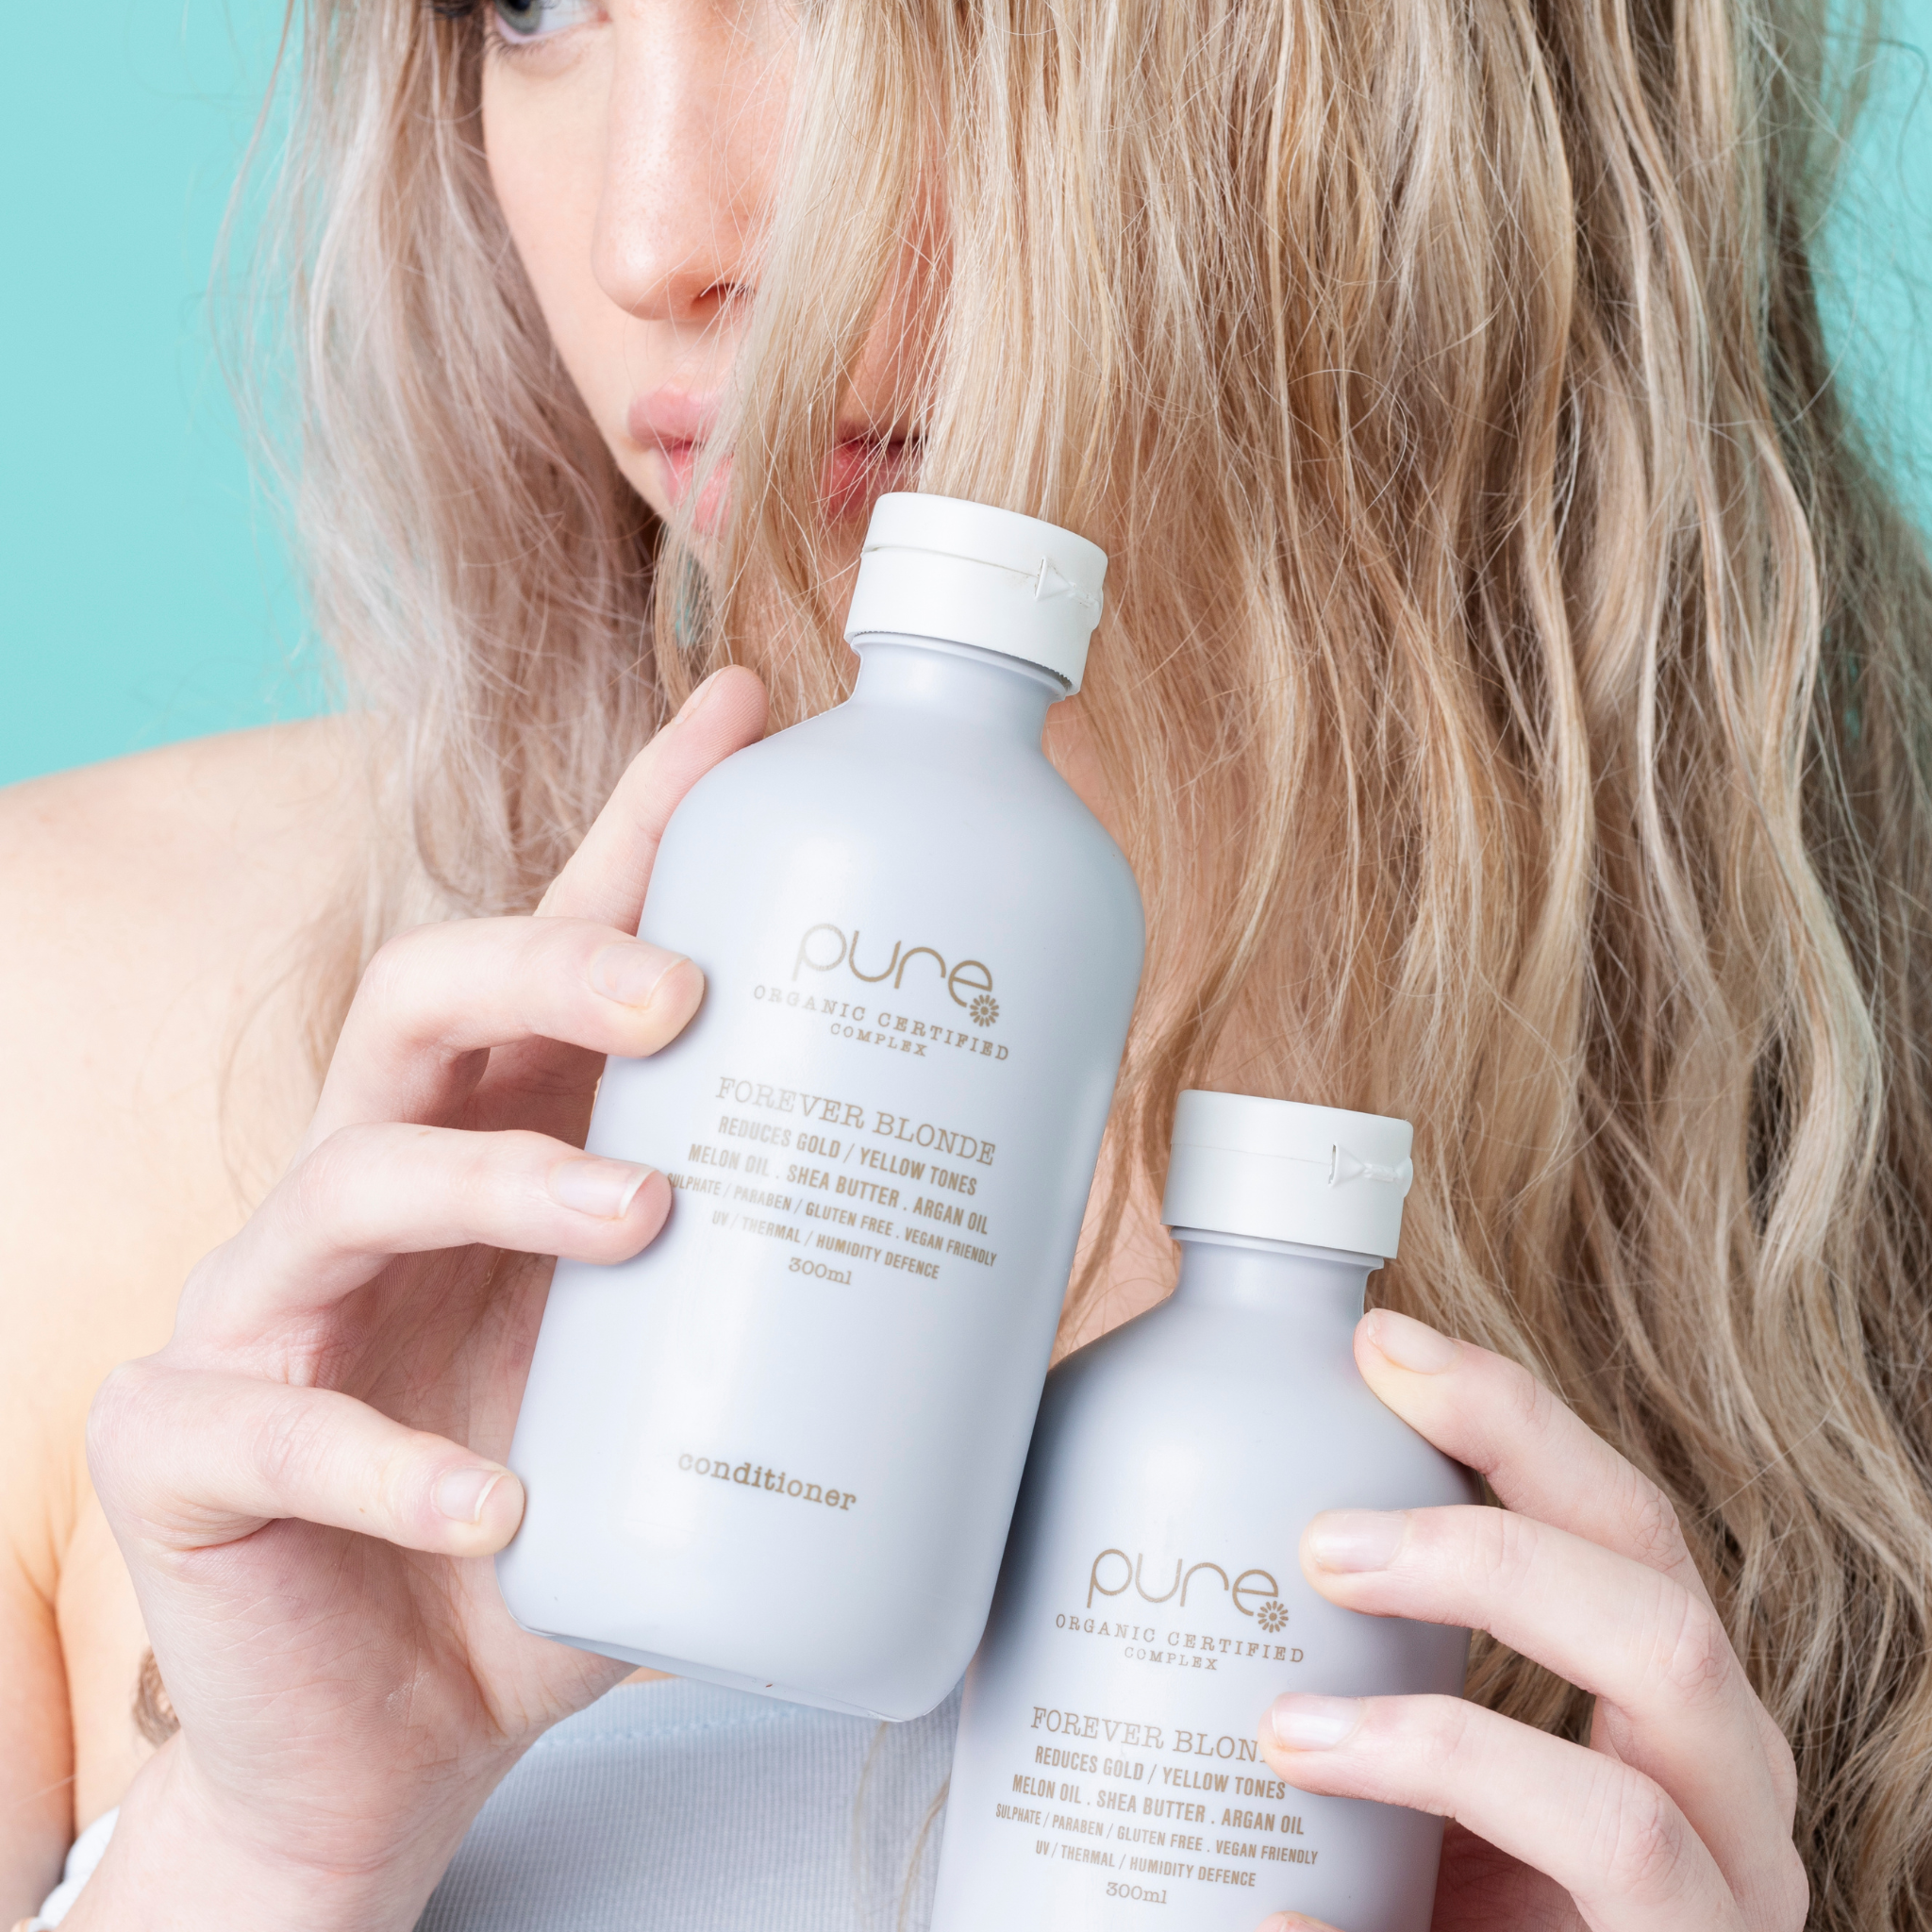 Pure Forever Blonde Conditioner 300ml